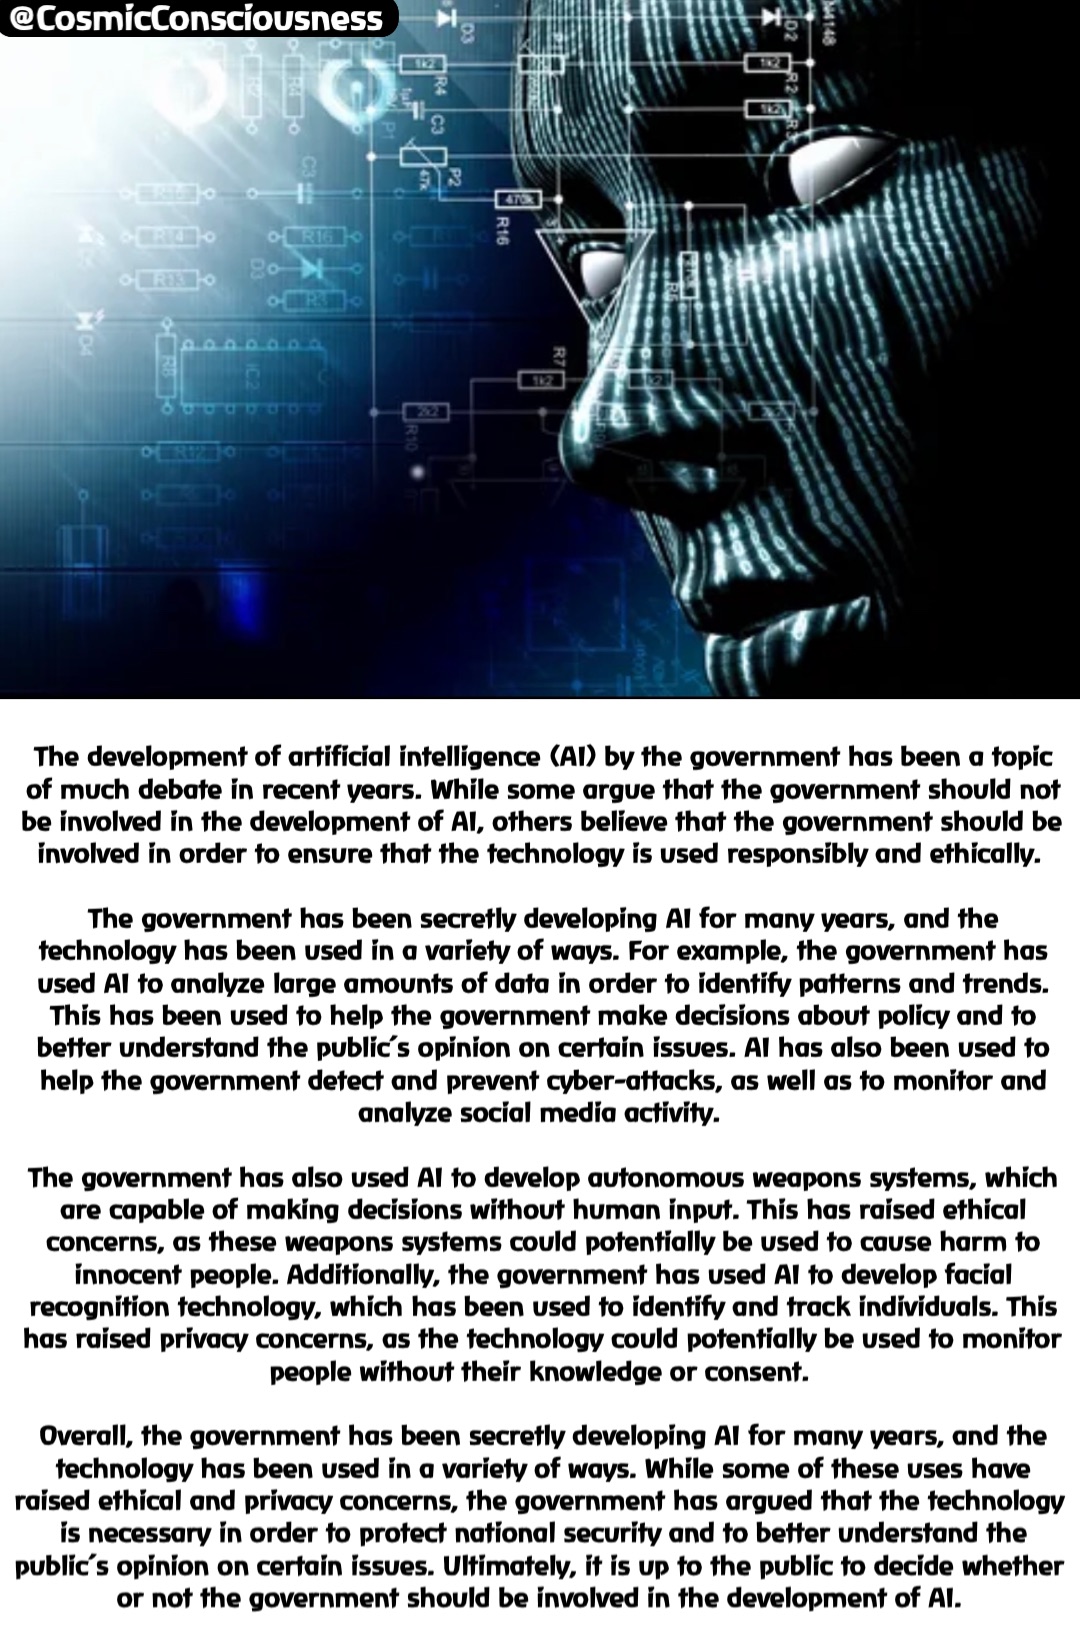 The development of artificial intelligence (AI) by the government has been a topic of much debate in recent years. While some argue that the government should not be involved in the development of AI, others believe that the government should be involved in order to ensure that the technology is used responsibly and ethically.

The government has been secretly developing AI for many years, and the technology has been used in a variety of ways. For example, the government has used AI to analyze large amounts of data in order to identify patterns and trends. This has been used to help the government make decisions about policy and to better understand the public’s opinion on certain issues. AI has also been used to help the government detect and prevent cyber-attacks, as well as to monitor and analyze social media activity.

The government has also used AI to develop autonomous weapons systems, which are capable of making decisions without human input. This has raised ethical concerns, as these weapons systems could potentially be used to cause harm to innocent people. Additionally, the government has used AI to develop facial recognition technology, which has been used to identify and track individuals. This has raised privacy concerns, as the technology could potentially be used to monitor people without their knowledge or consent.

Overall, the government has been secretly developing AI for many years, and the technology has been used in a variety of ways. While some of these uses have raised ethical and privacy concerns, the government has argued that the technology is necessary in order to protect national security and to better understand the public’s opinion on certain issues. Ultimately, it is up to the public to decide whether or not the government should be involved in the development of AI. @CosmicConsciousness